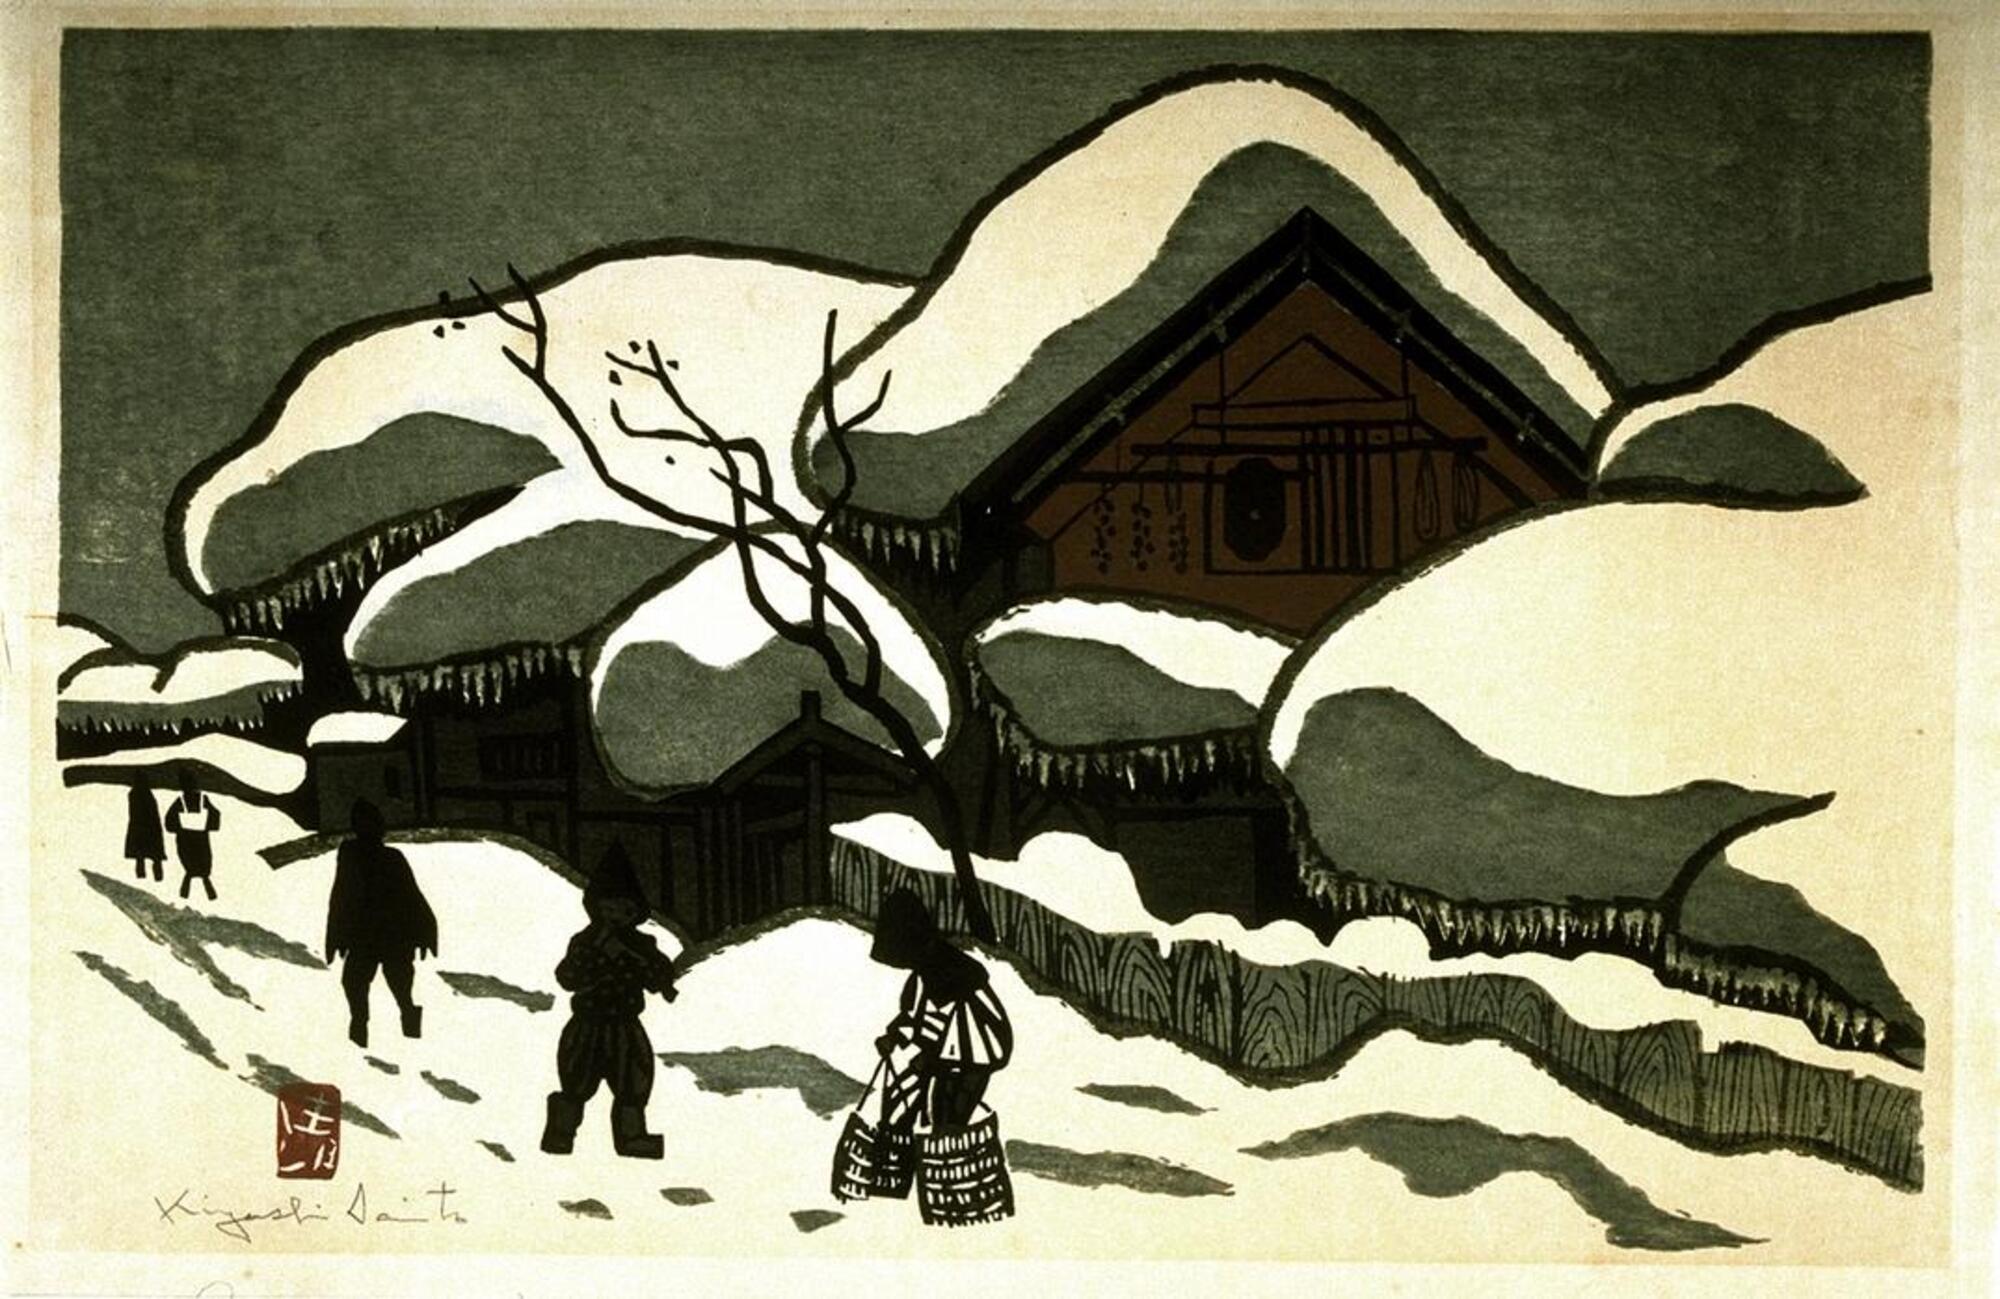 A native of Sakamoto in Fukushima Prefecture, the artist here depicts his far northern hometown with the snow-covered imagery to present a view of traditional Japan in a innovative and modern way.<br />